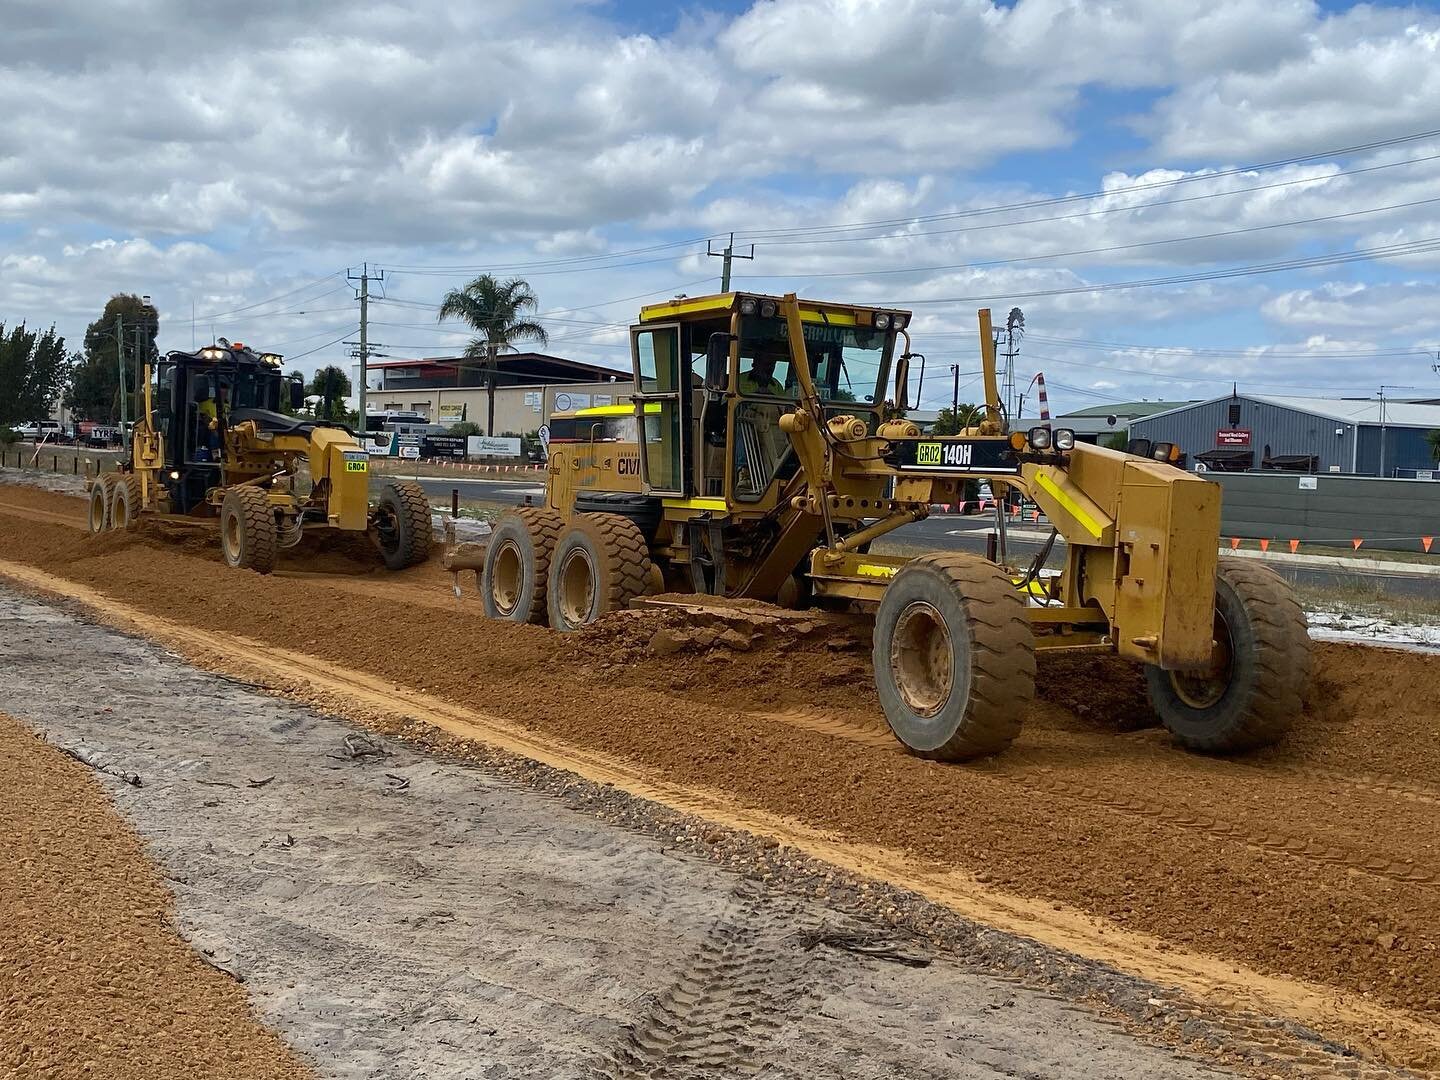 Father &amp; son Falloon duo mixing gravel, bringing road construction to completion at the Promenade in Australind. 
&bull;
&bull;
&bull;
#southwestwa #bunburywa #civilconstruction #family #roadconstruction #geographecivilptyltd #jobswa